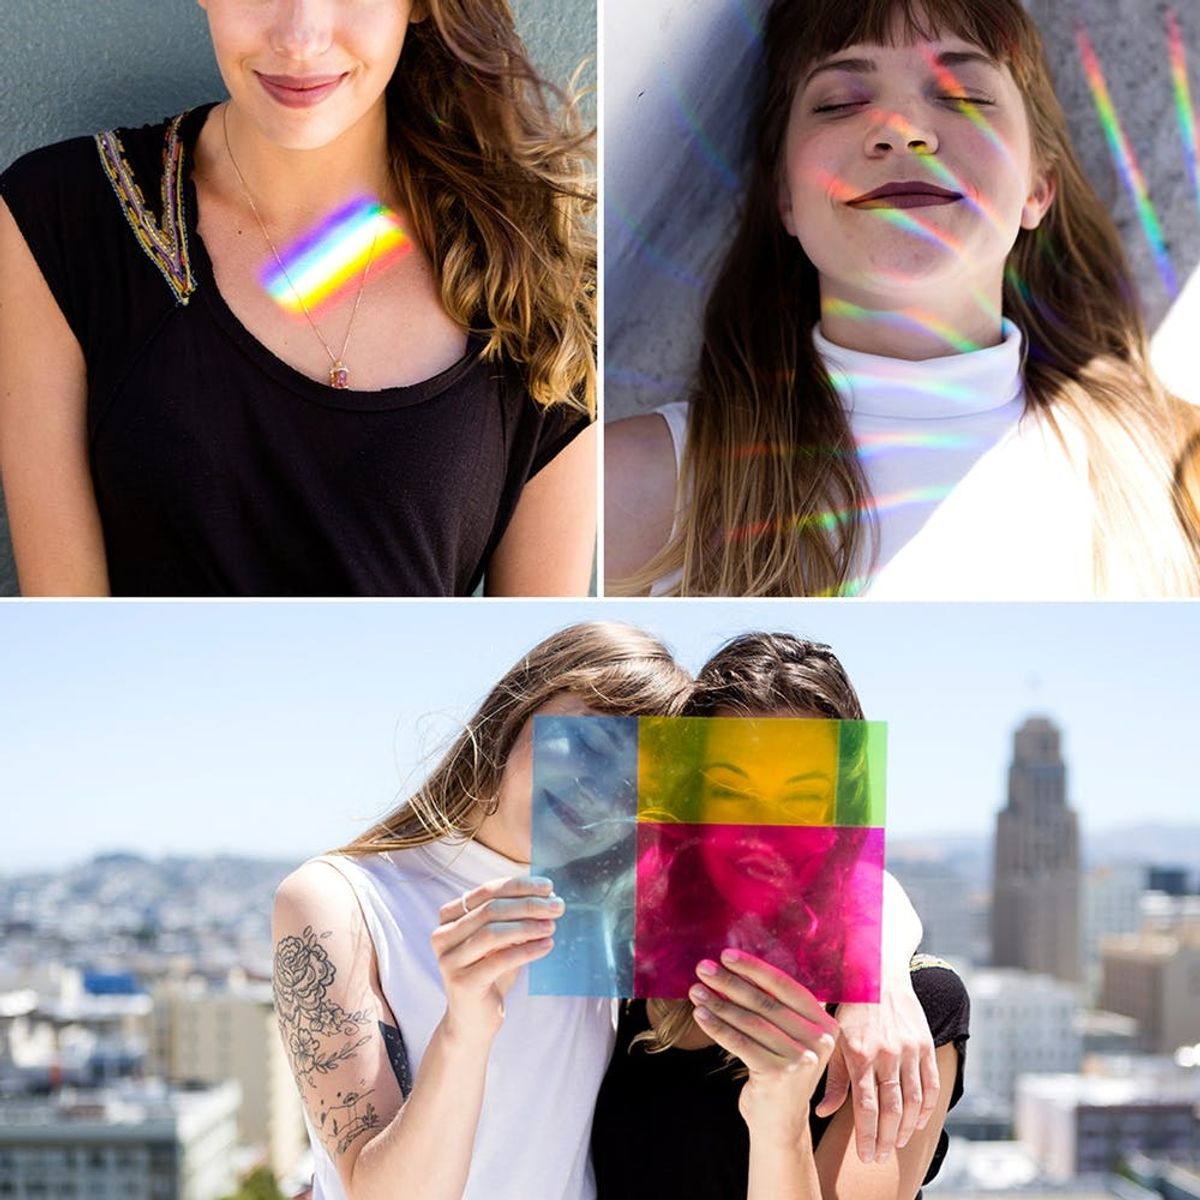 Here’s What Happened When We Tried Rainbow Photography